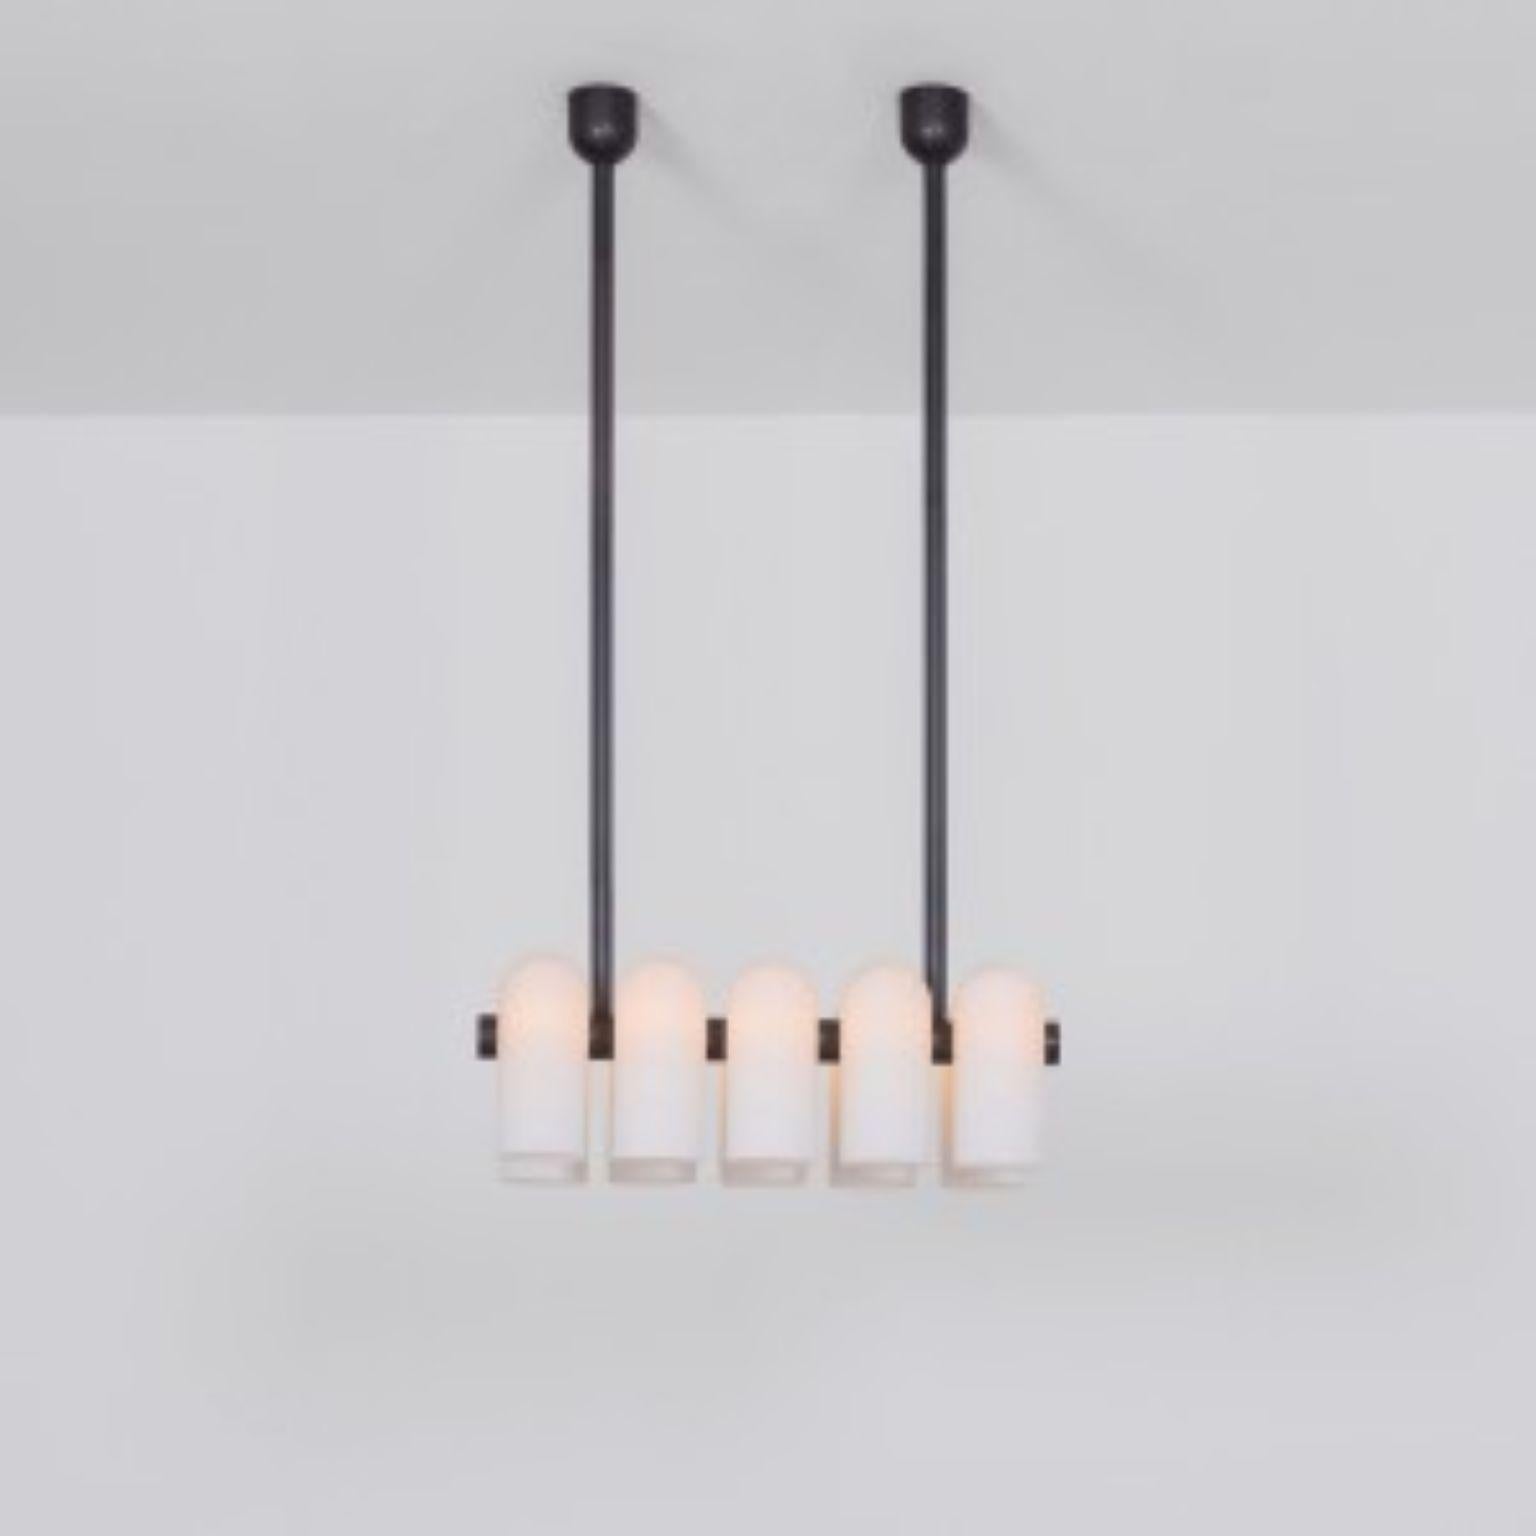 Odyssey Linear SM Black Chandelier by Schwung
Dimensions: W 114 x D 31 x H 132 cm
Materials: Black gunmetal and frosted glass

Finishes available: Black gunmetal and polished nickel
Other sizes available

Schwung is a German word, and loosely